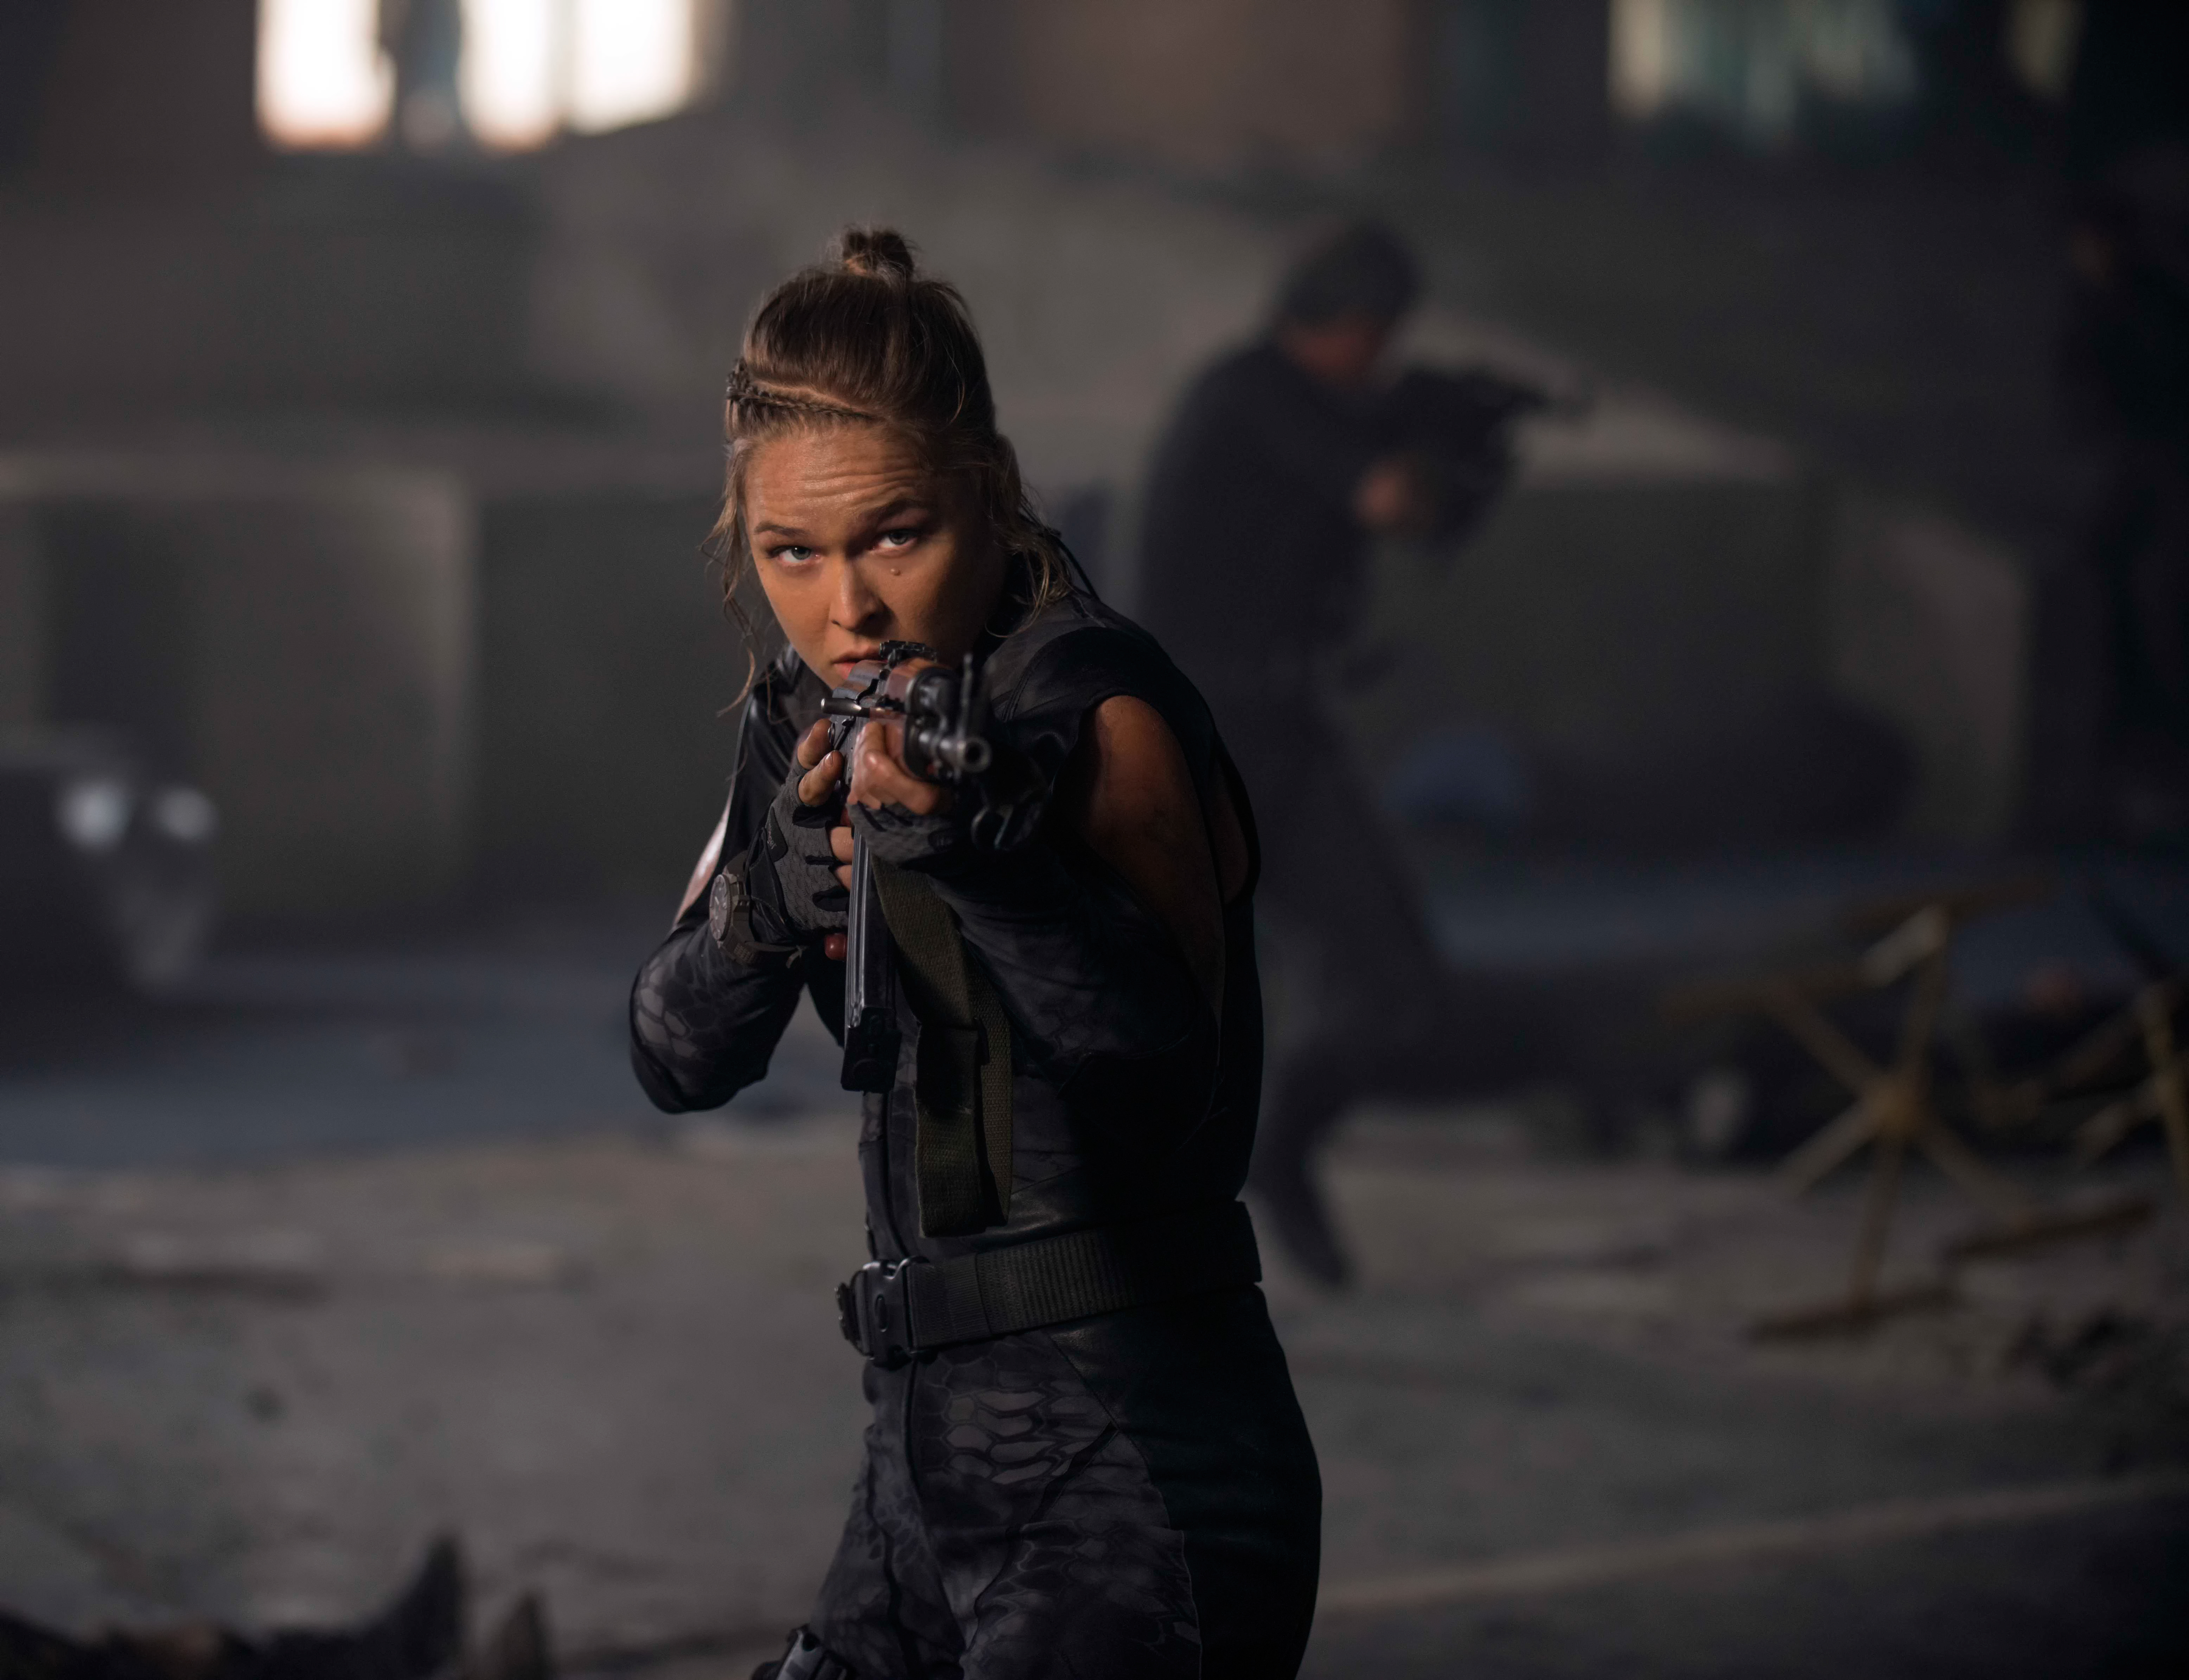 ronda rousey, movie, the expendables 3, luna (the expendables), the expendables Full HD